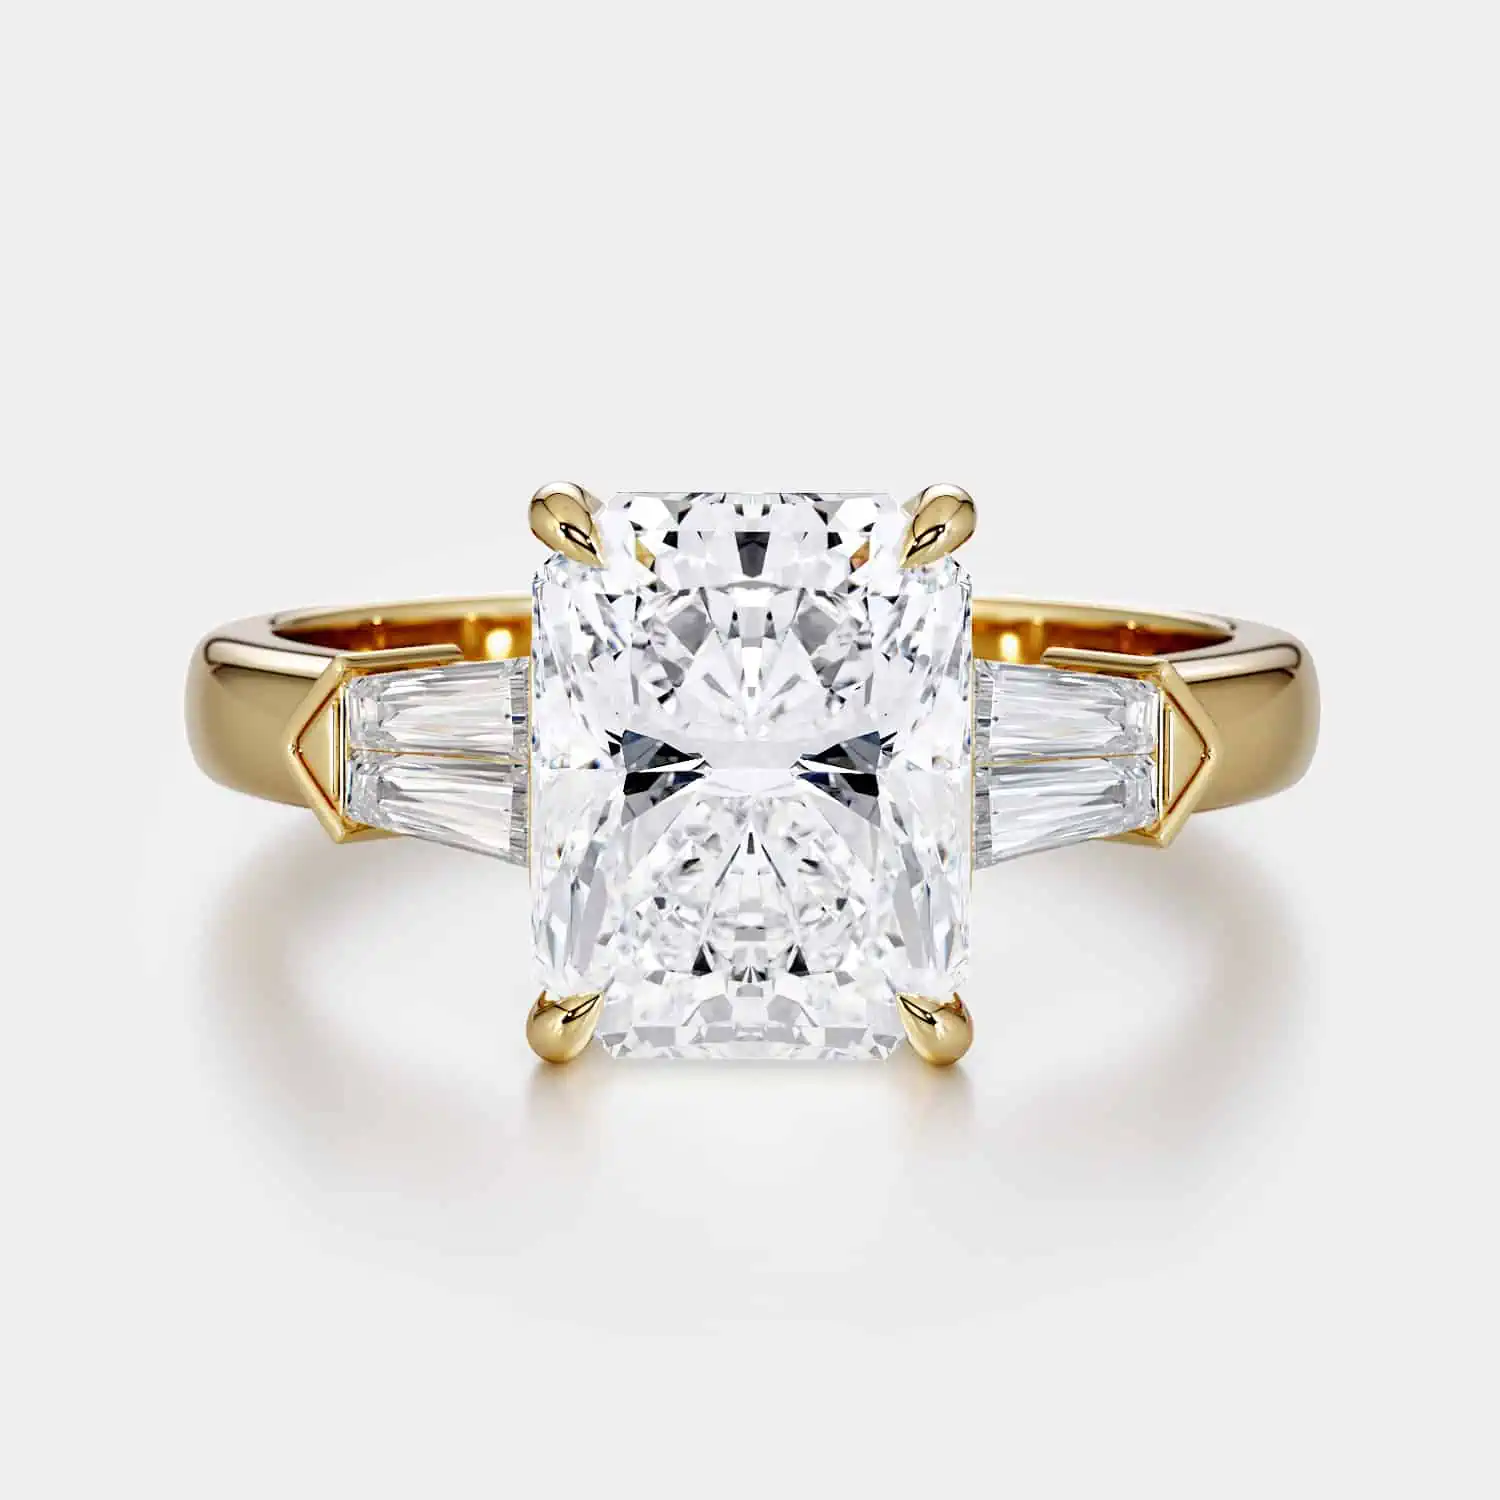 2 Carat Radiant Cut Diamond Ring, Gold and tapers on white background